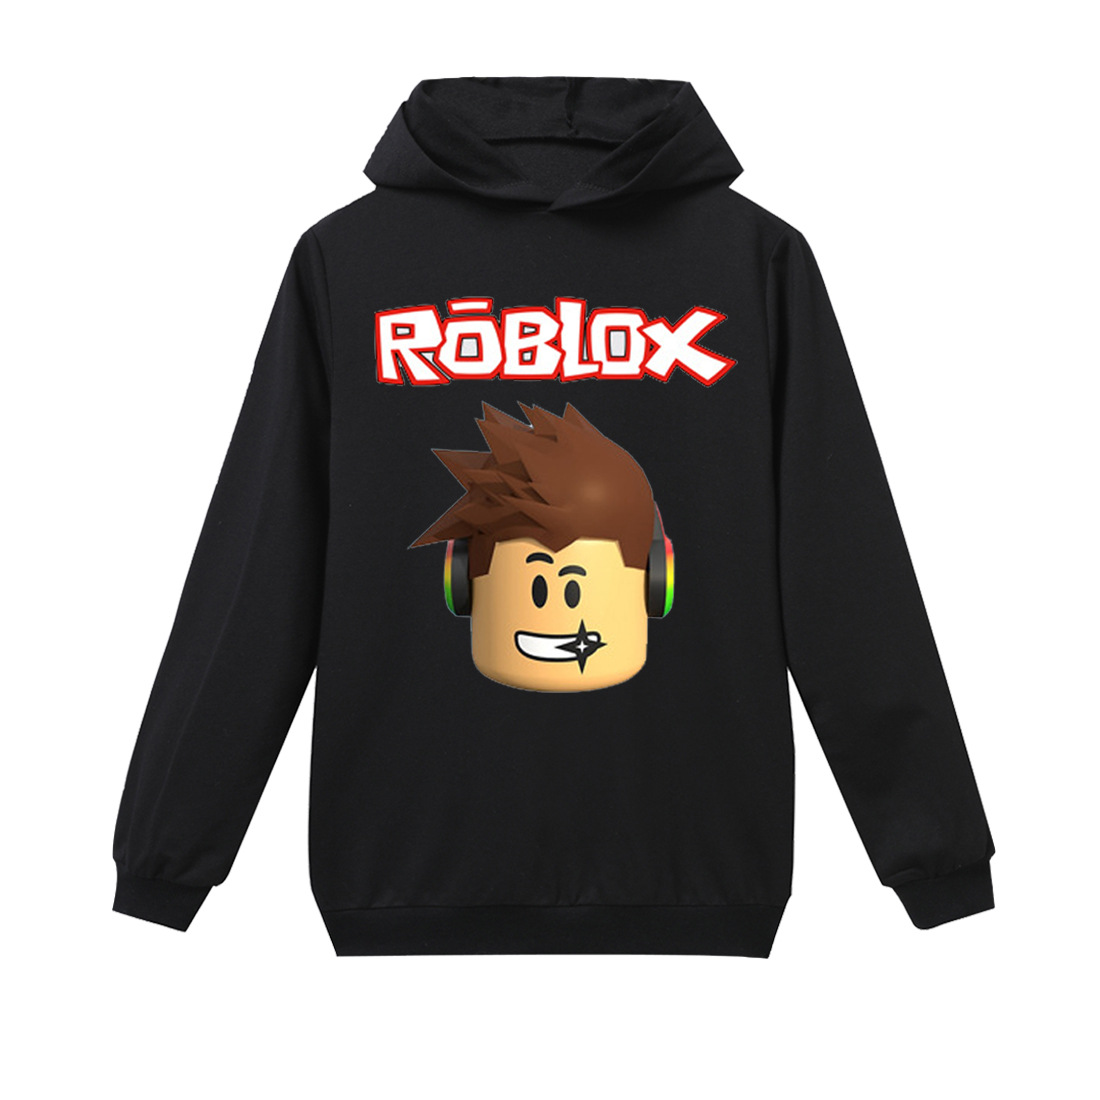 Wholesale Roblox Black Hoodie On Halloween Buy Cheap In Bulk From China Suppliers With Coupon Dhgate Com - roblox black outfits